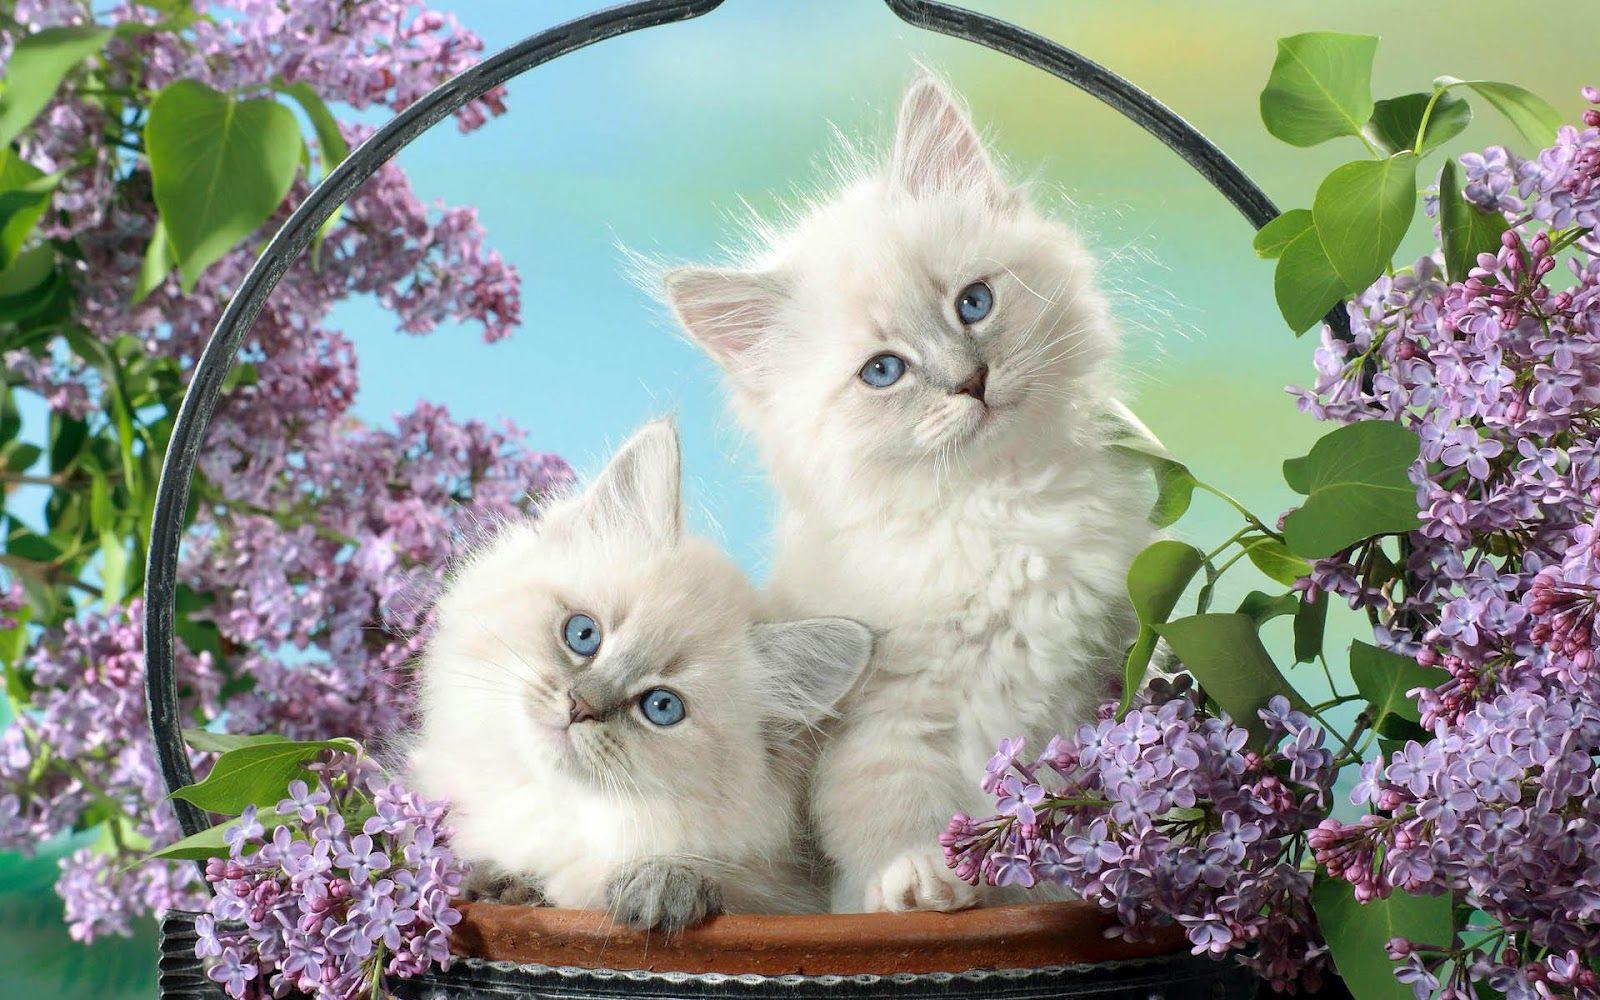 Cute and Lovely Cat Wallpaper for Desktop in 2019